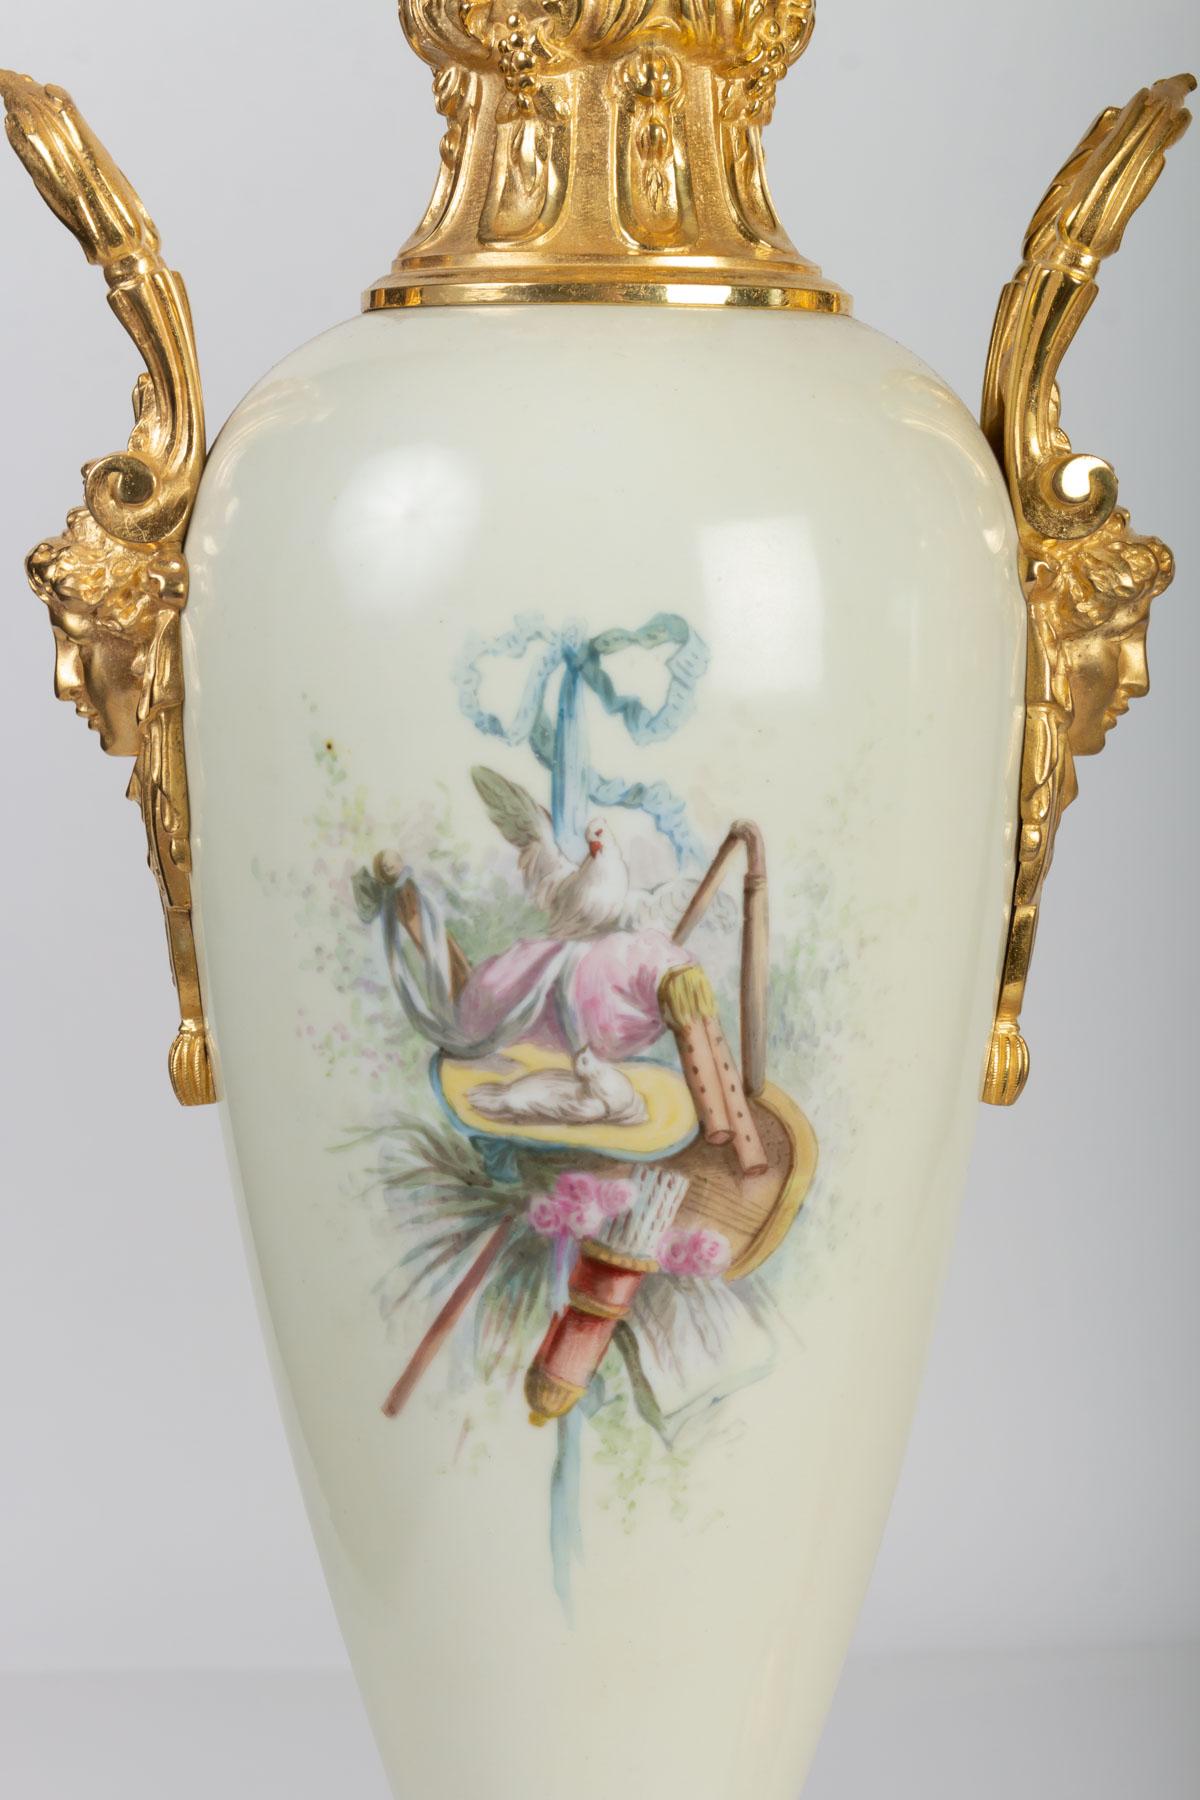 19th Century Pair of Gold Bronze, Painted Porcelain and Onyx Vases